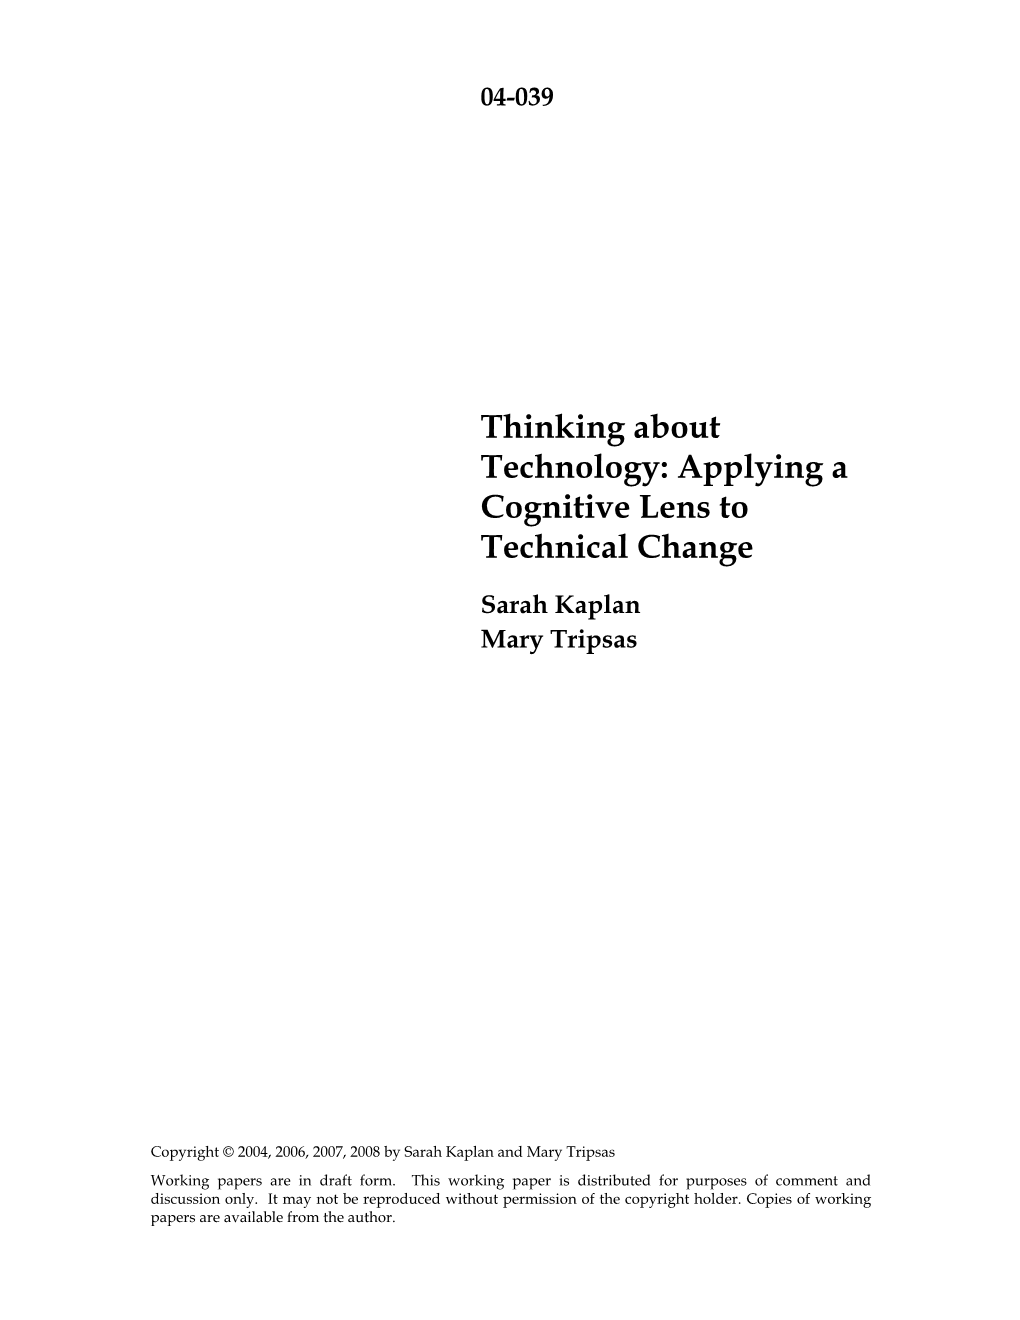 Thinking About Technology: Applying a Cognitive Lens to Technical Change